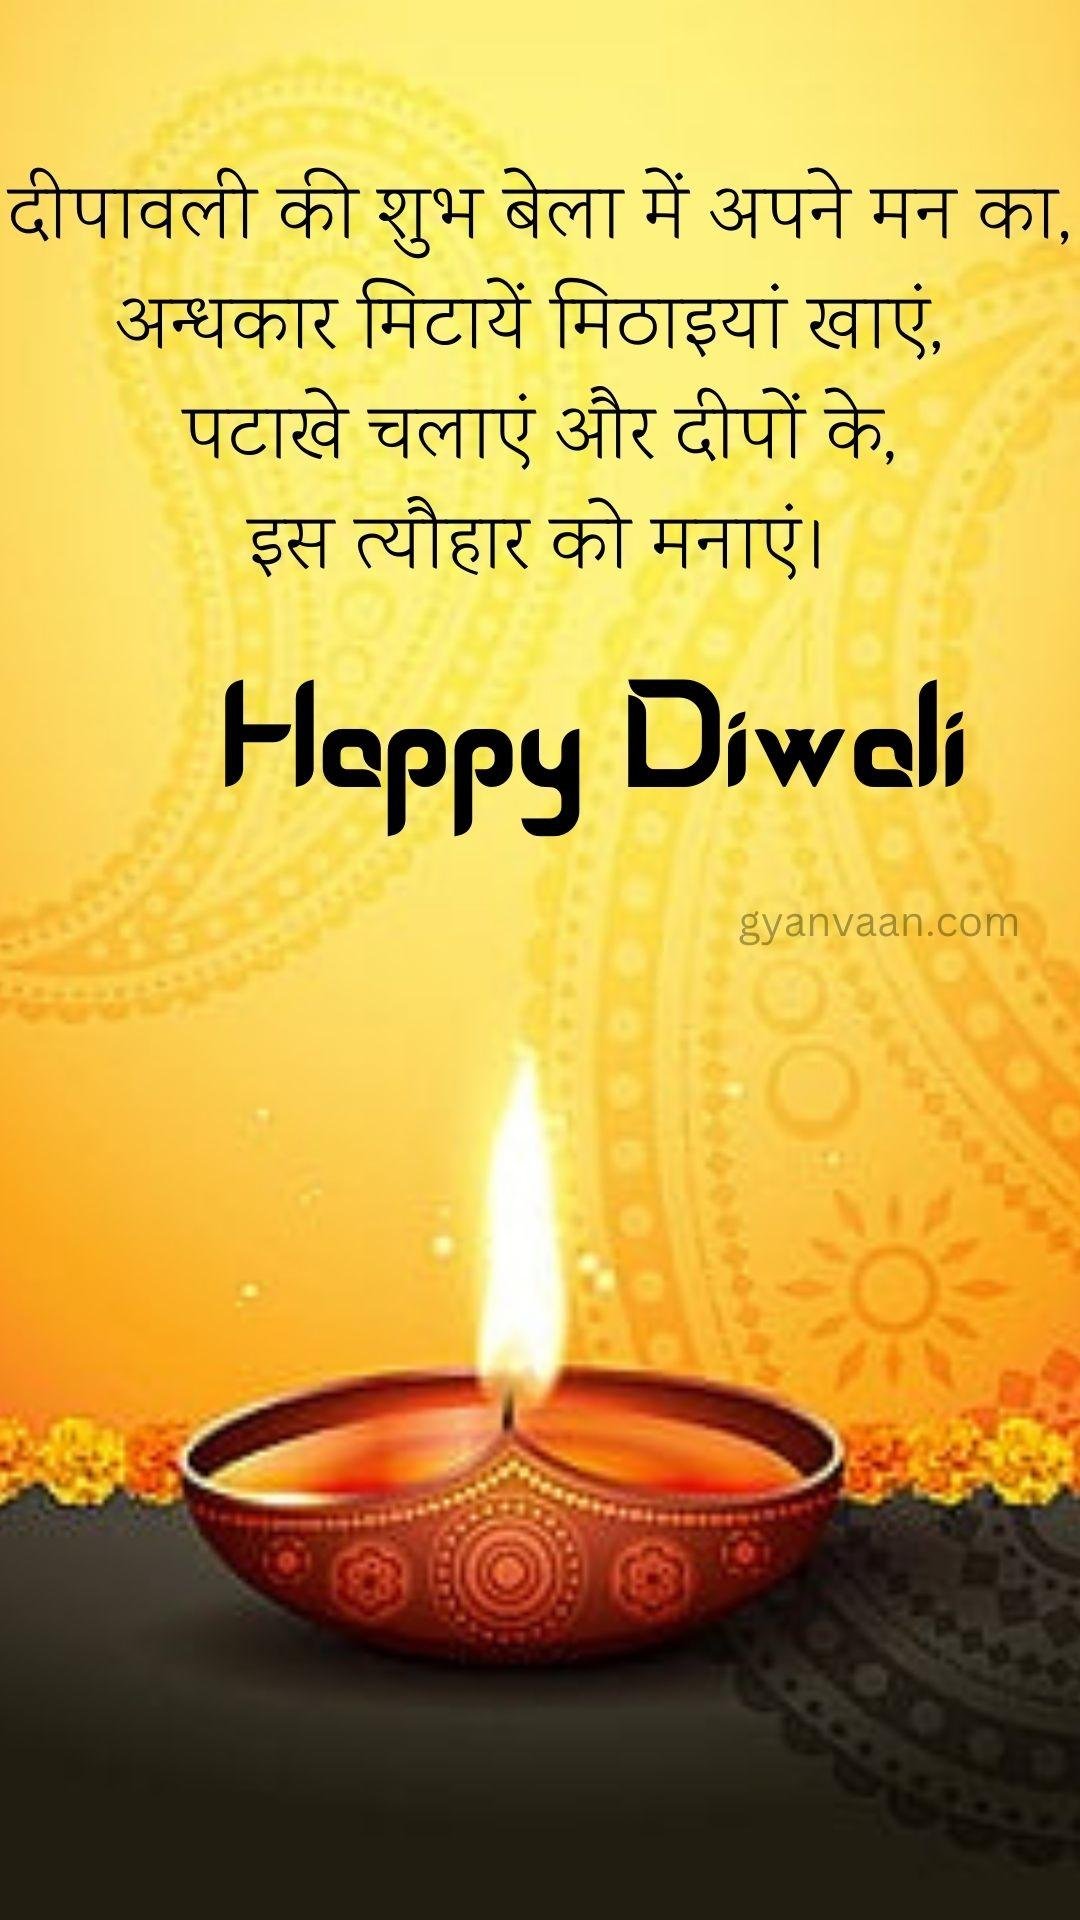 Diwali Quotes In Hindi With Wishes23 - Diwali Quotes In Hindi